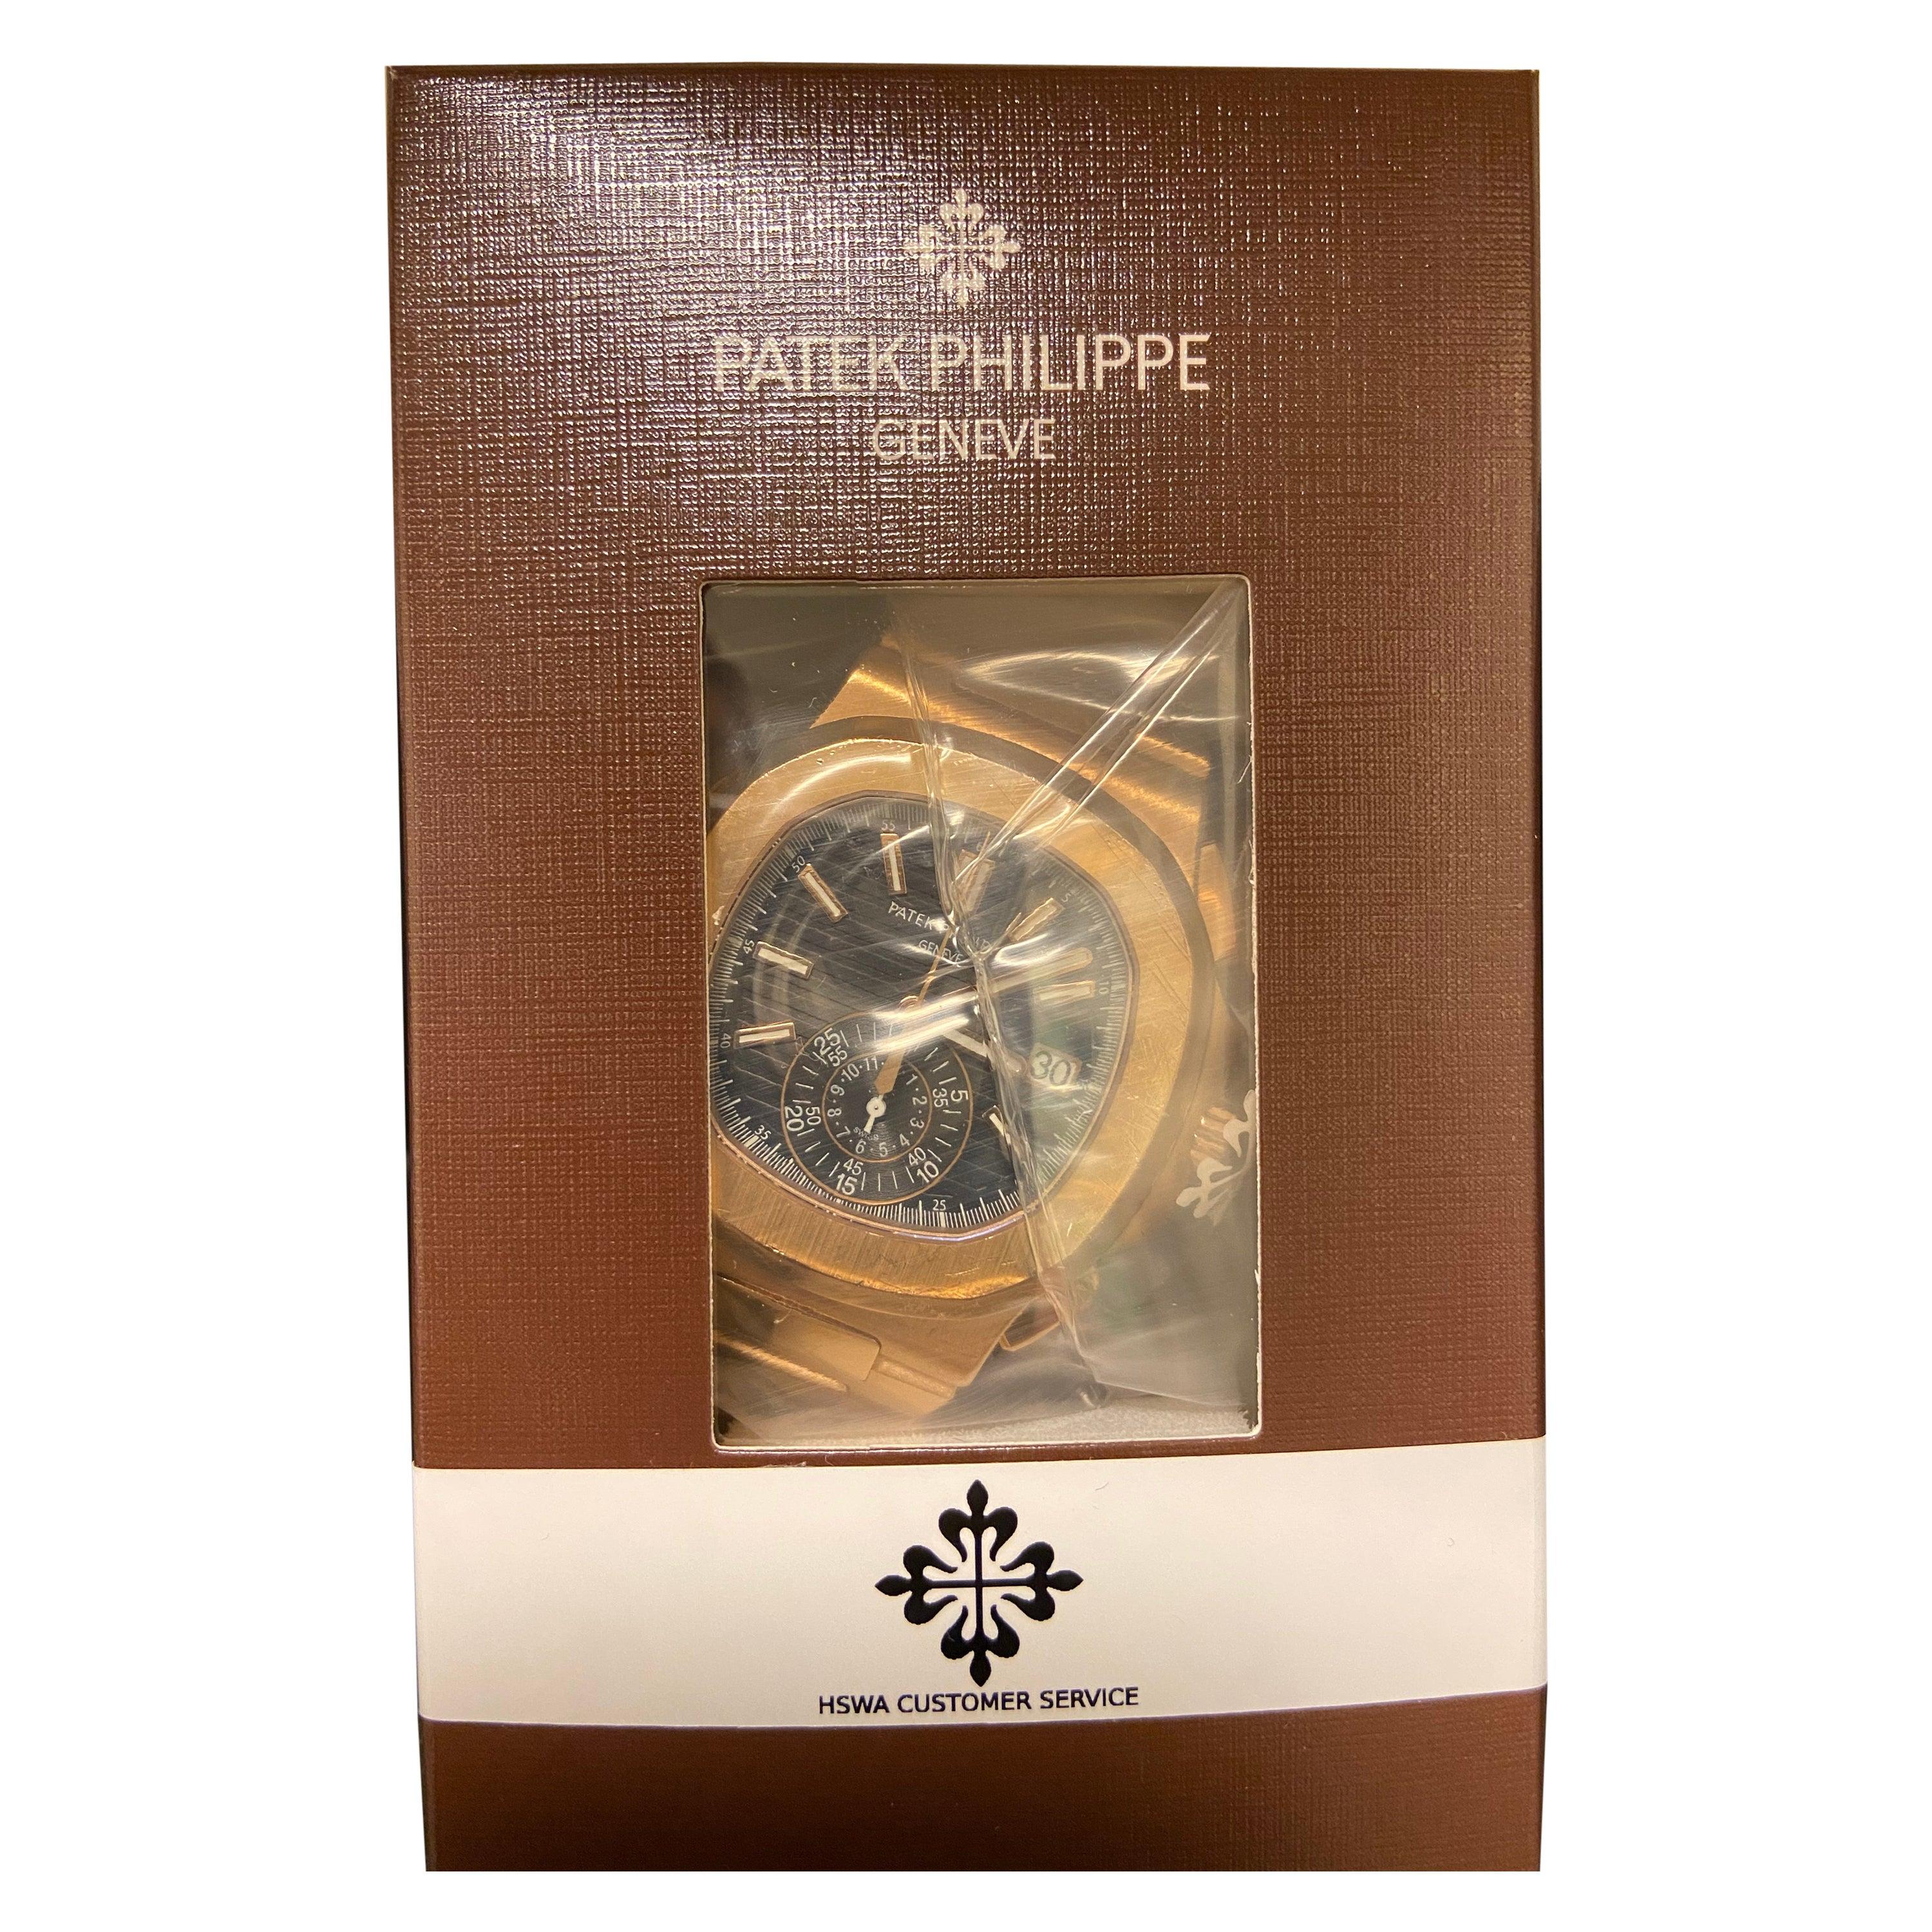 As you can see in the pictures, completely, recently, thoroughly serviced by Patek Philippe in Switzerland February 2022. Resisted polishing the slight wear to preserve the value. Still in box, the Patek service seal still affixed to unit by Patek